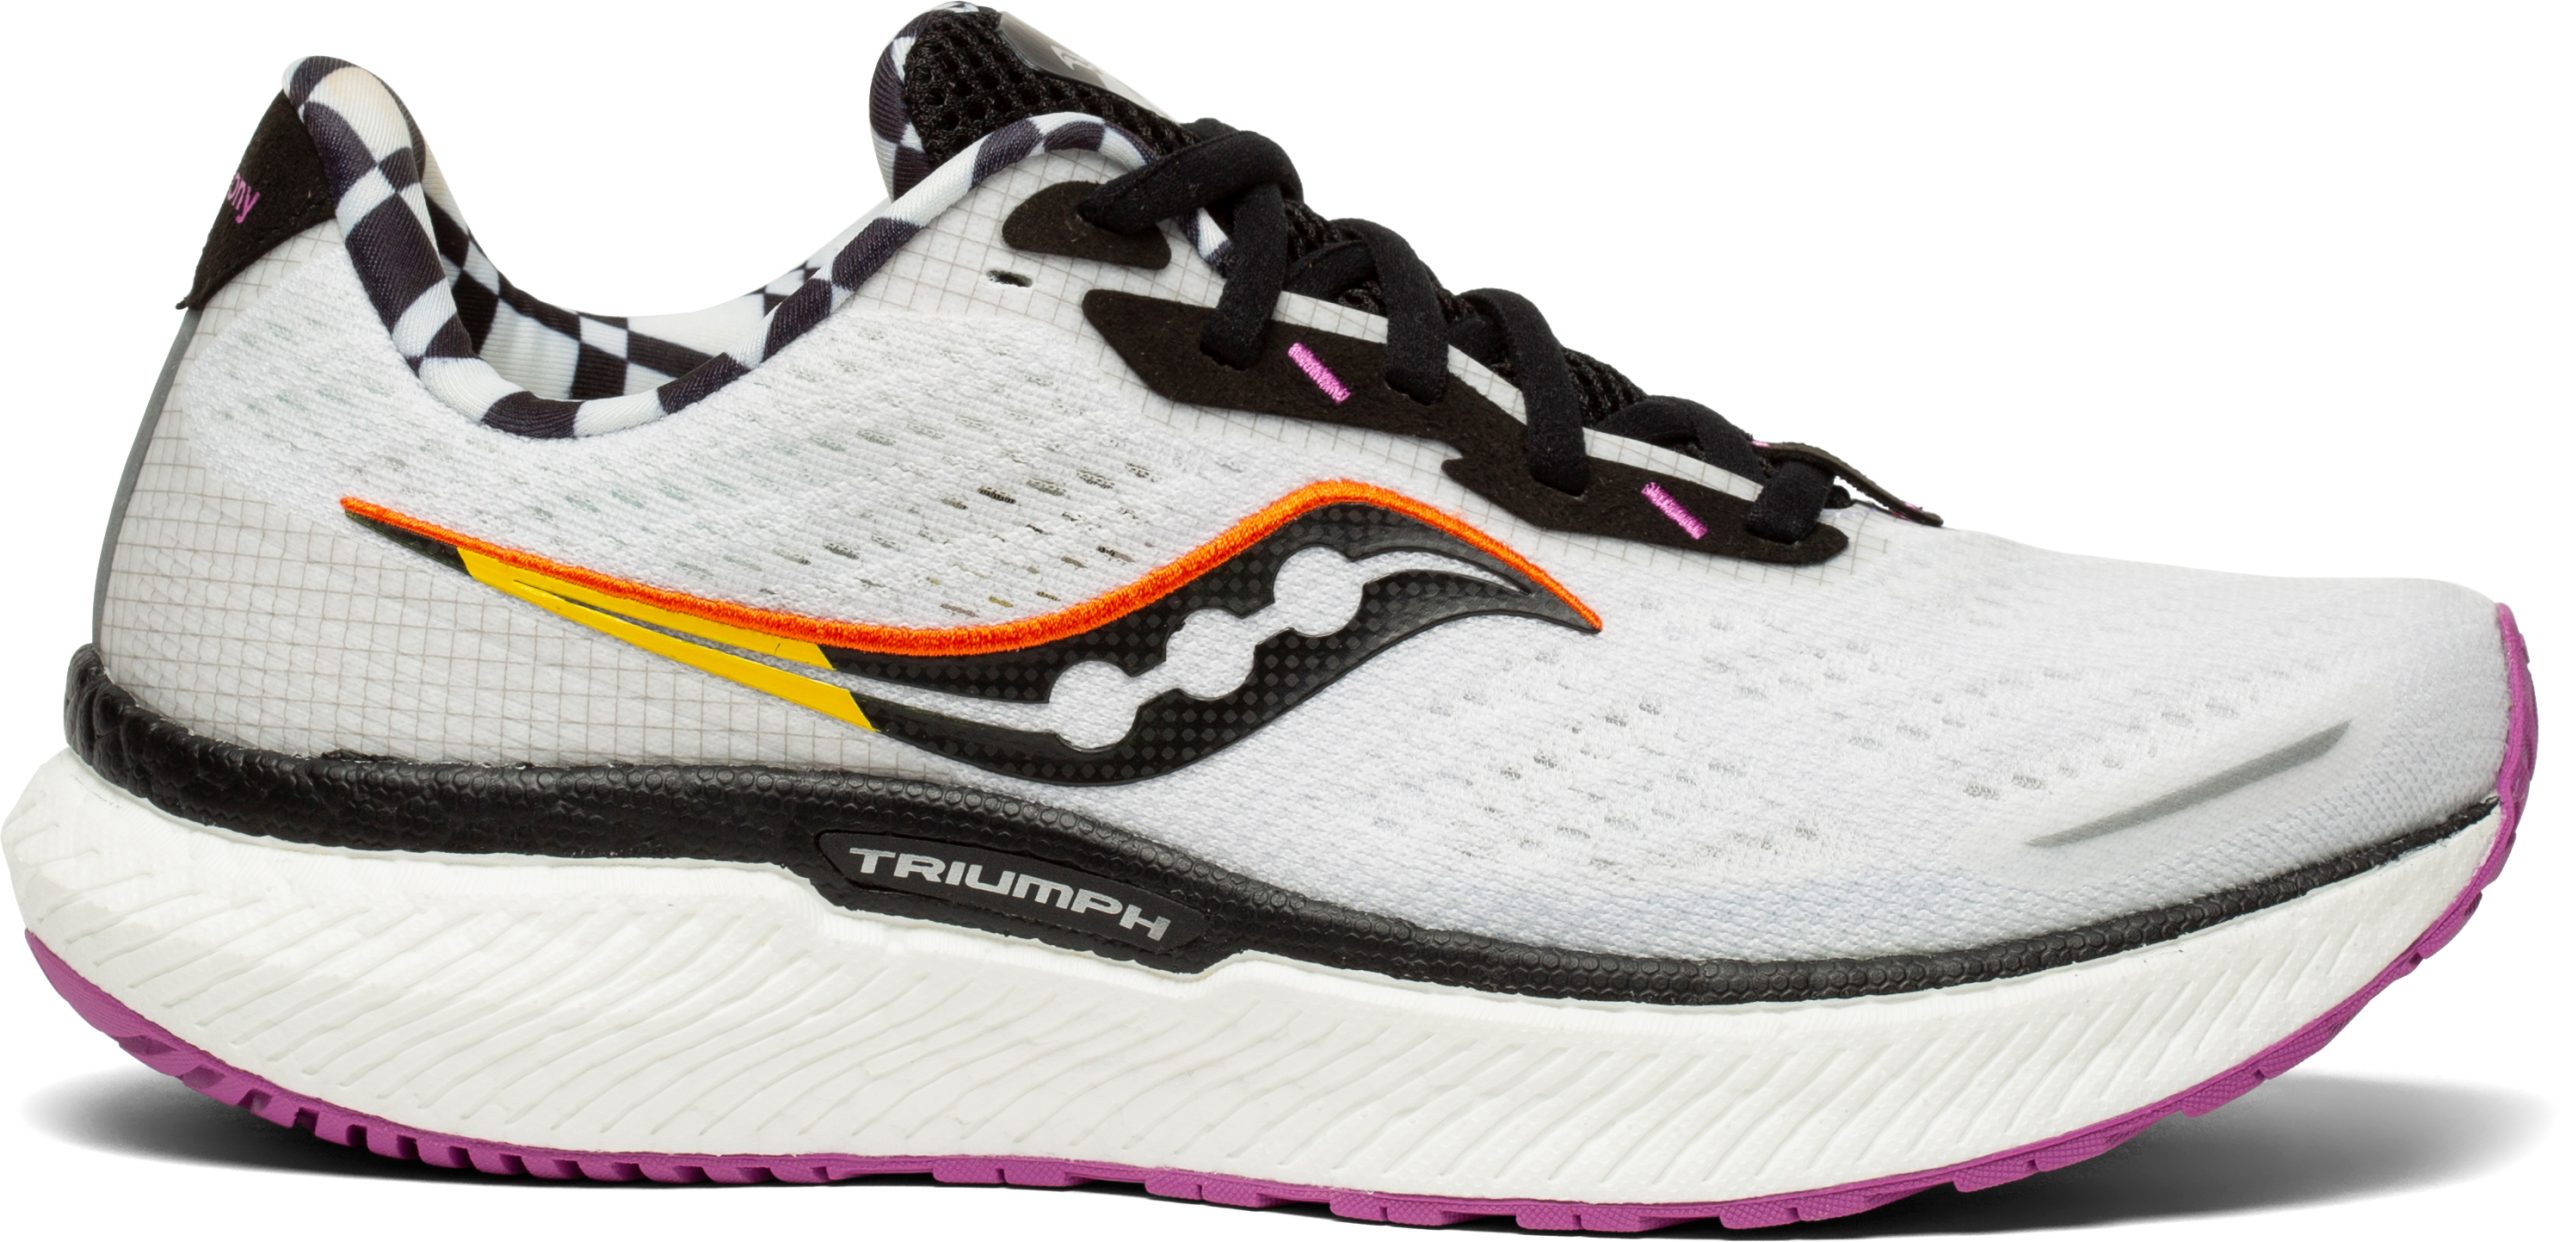 Saucony® Launches the All-New Triumph 19